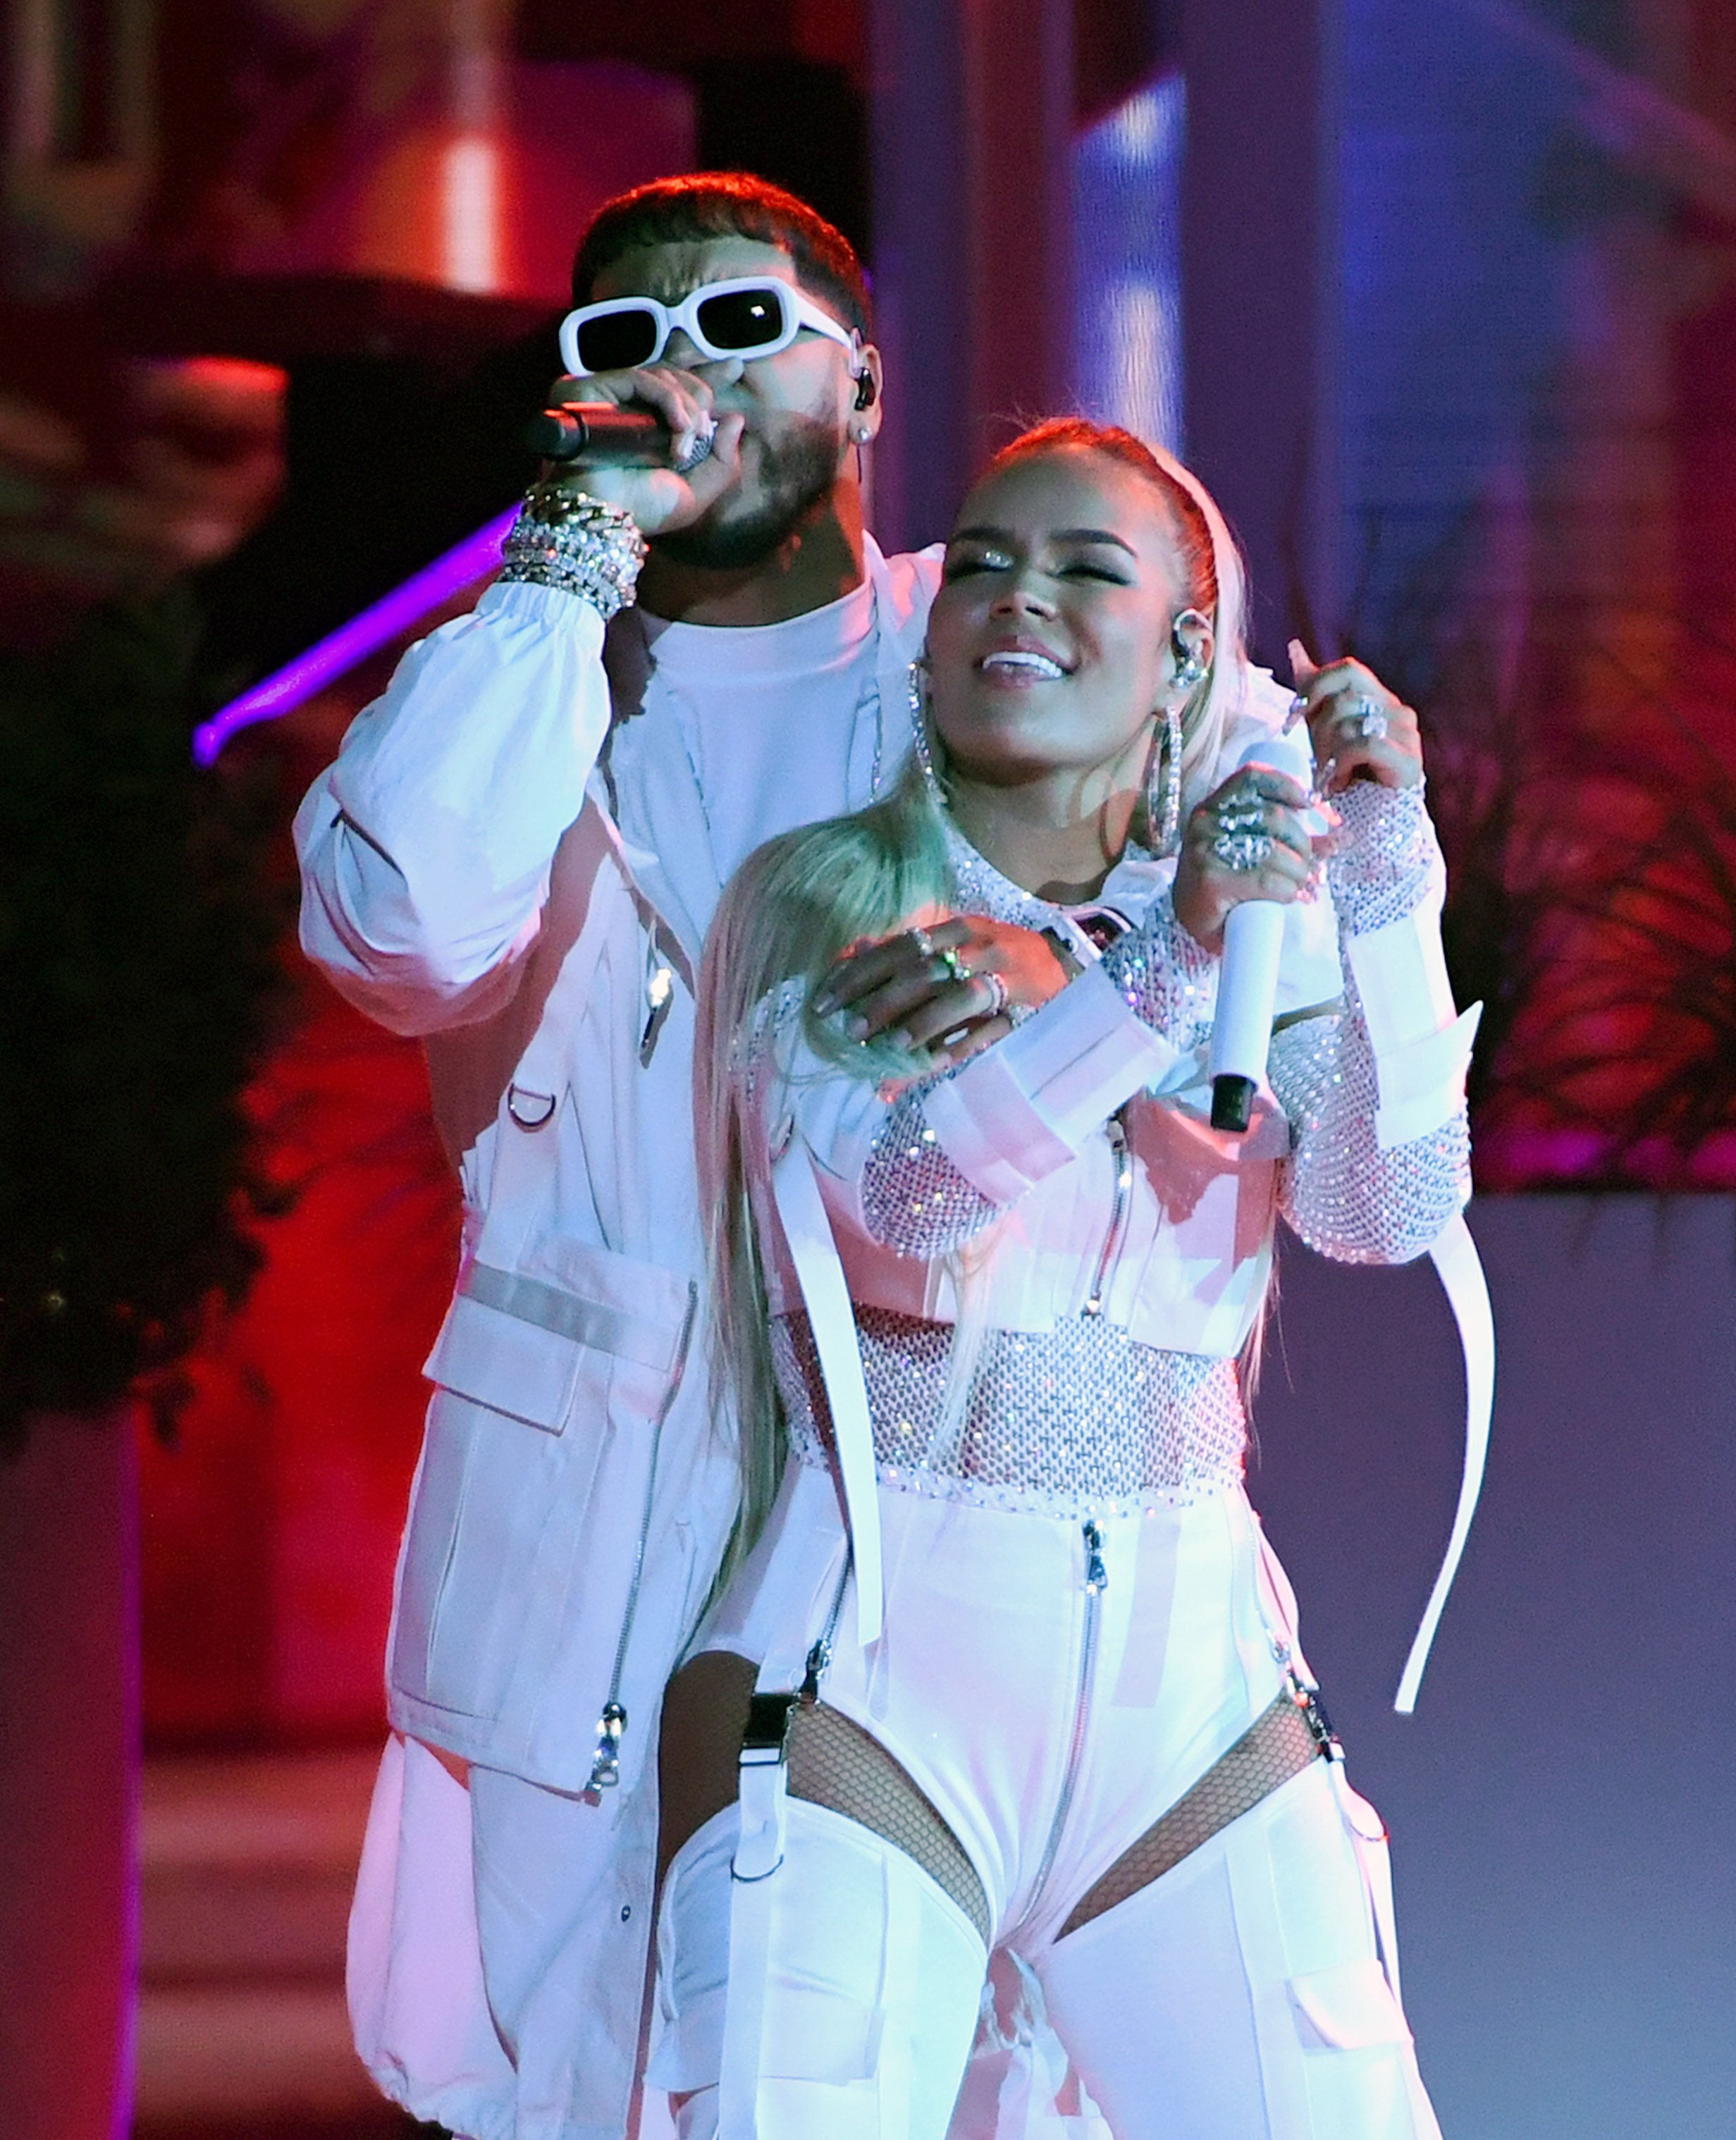 Anuel AA and Karol G perform during the 2019 Billboard Latin Music Awards at the Mandalay Bay Events Center, 2019 in Las Vegas, Nevada. | Photo: Getty Images